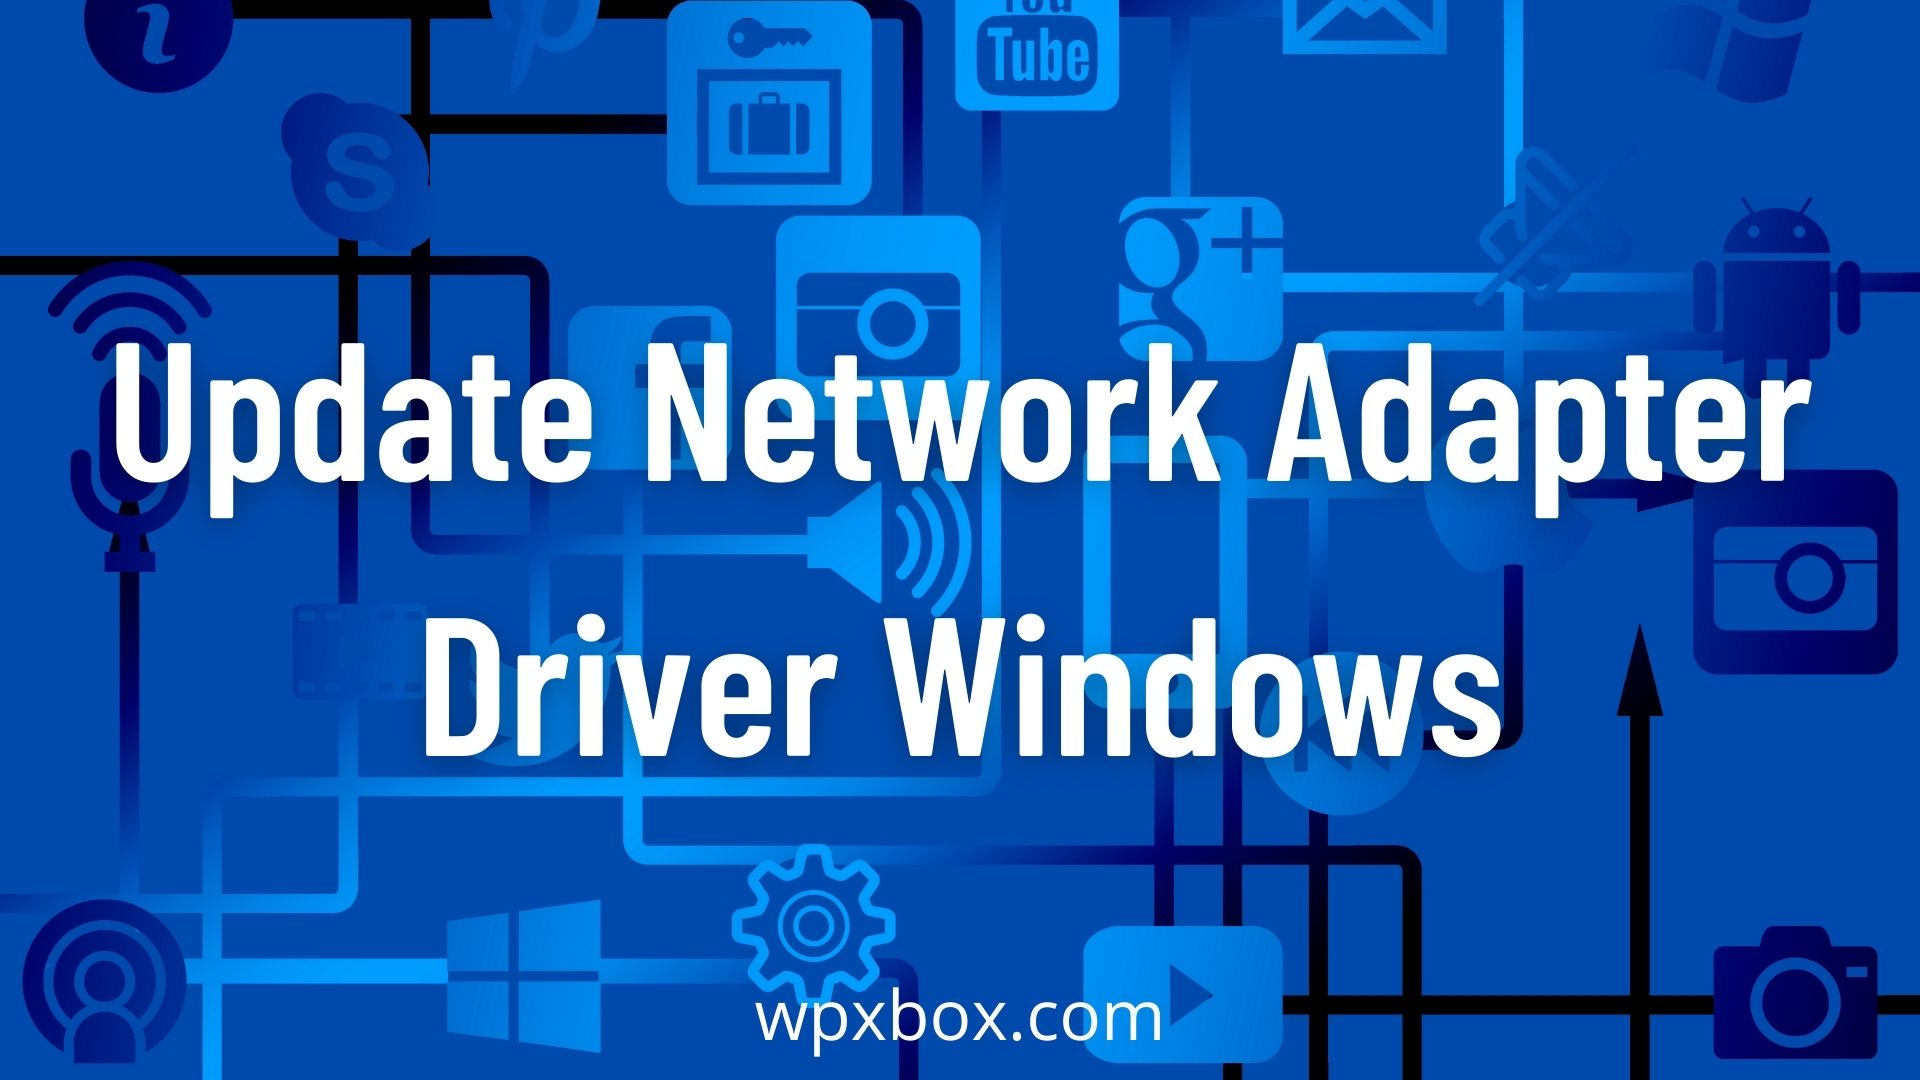 dell network adapter driver windows 10 download